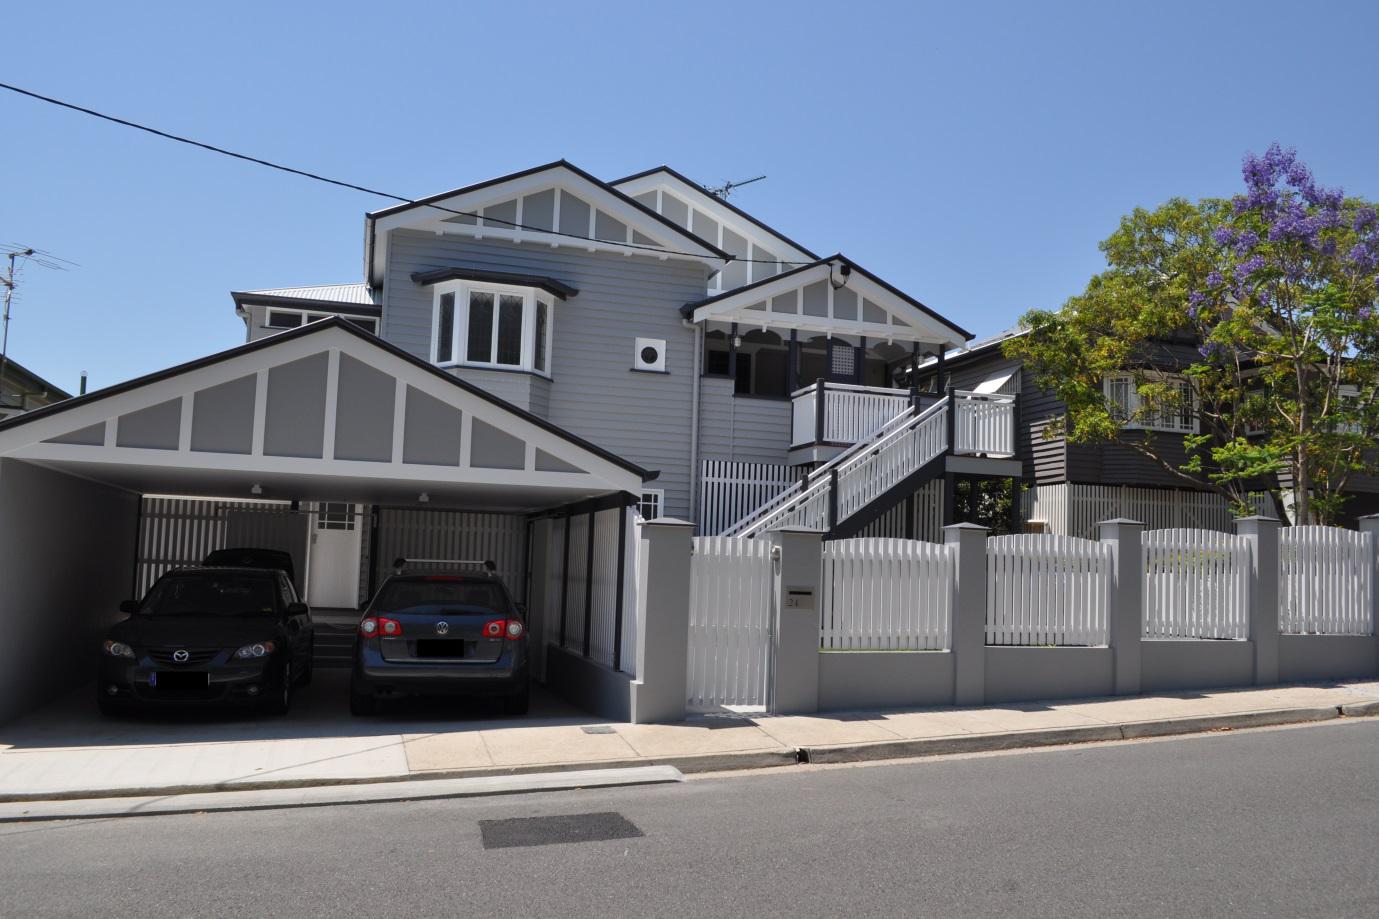 Home renovation electrical services Brisbane, Grange, Albion, Milton, Indooroopilly, Kenmore